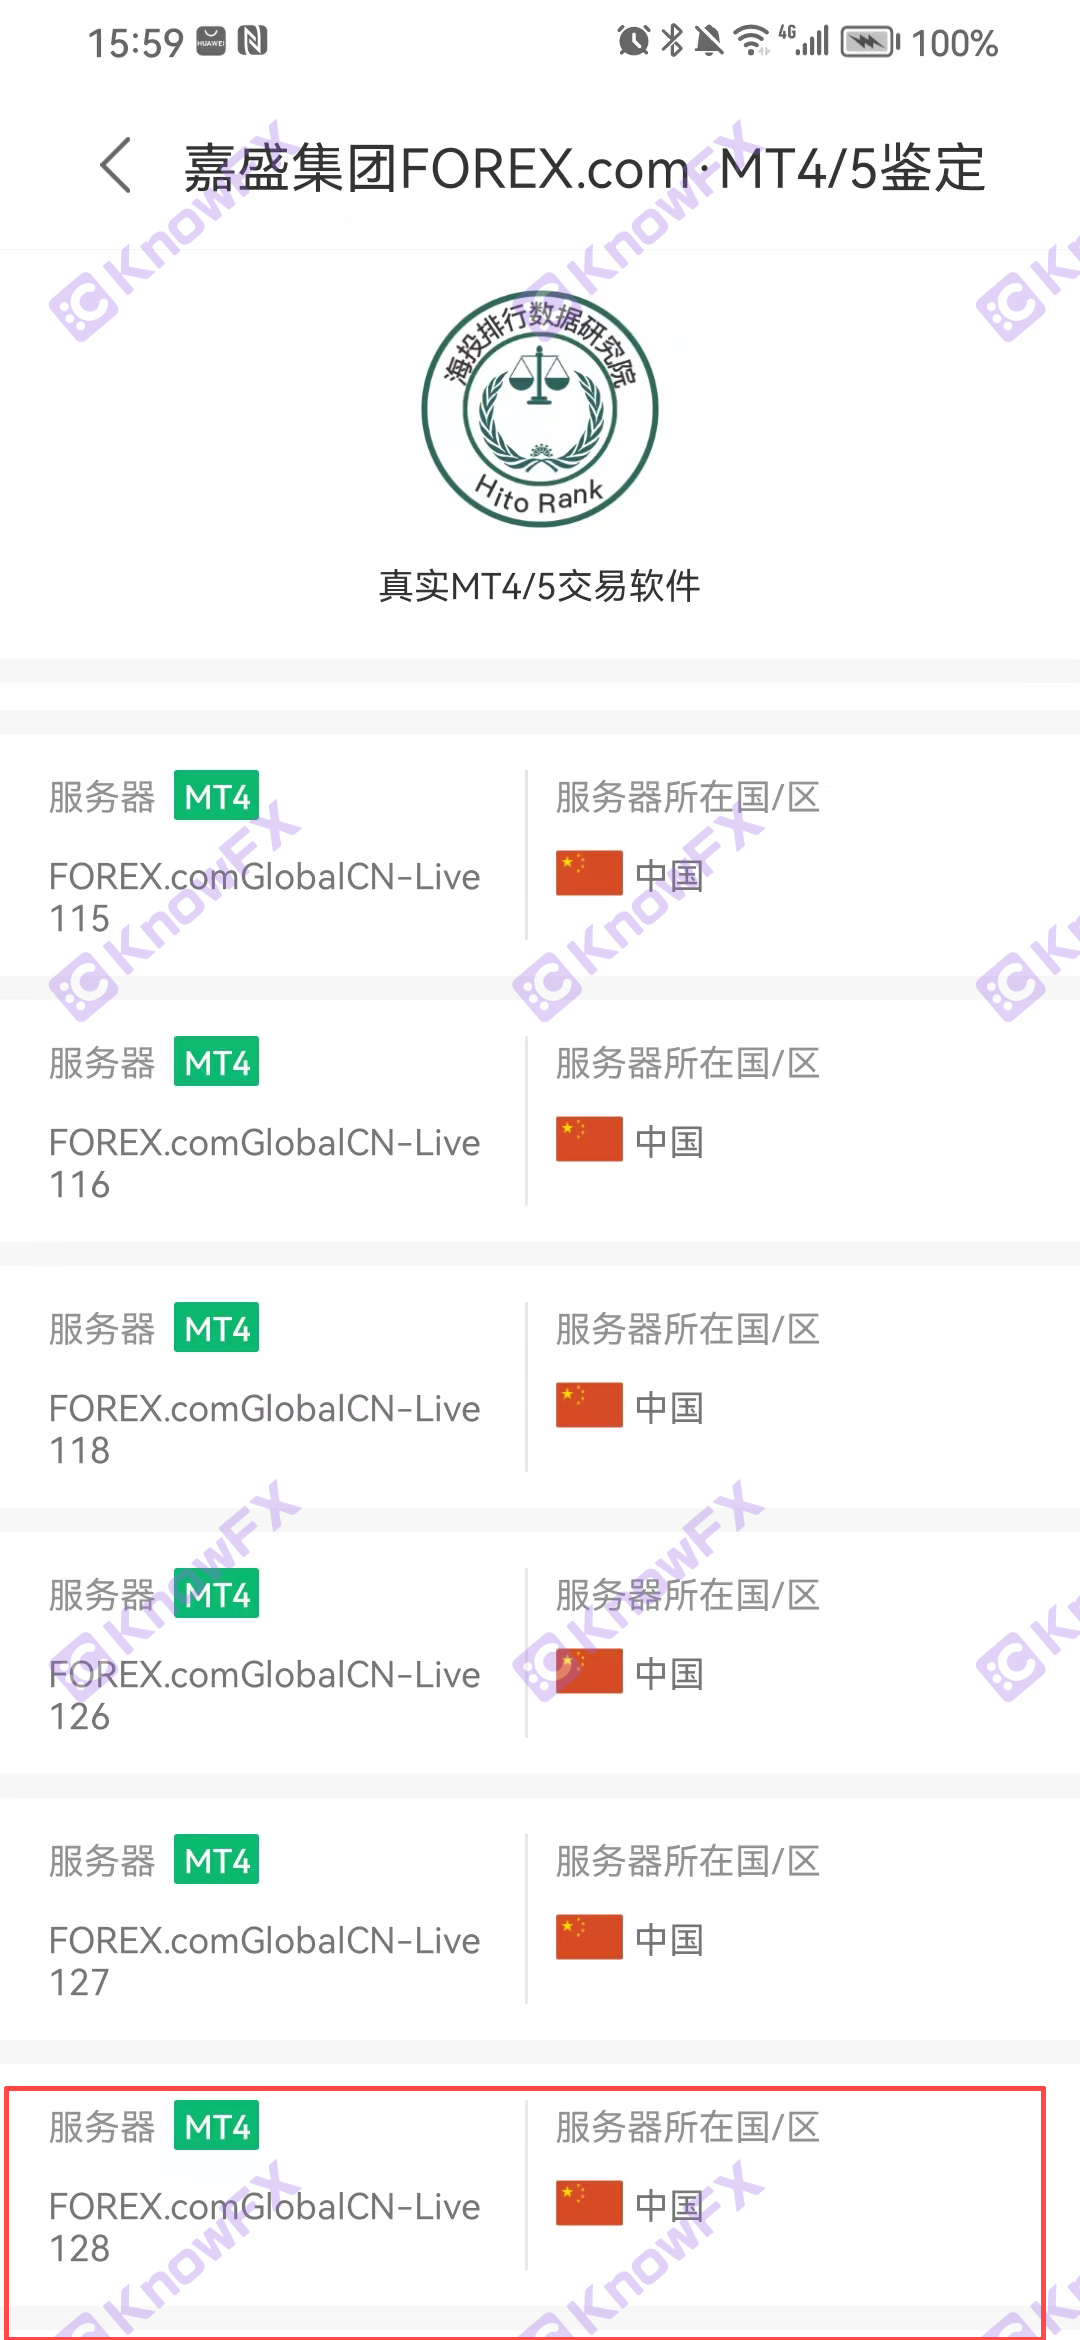 Foreign promotion of foreign exchange brokers FOREX!Regulatory issues are frequent!There is a problem with the server!Intersection-第19张图片-要懂汇圈网